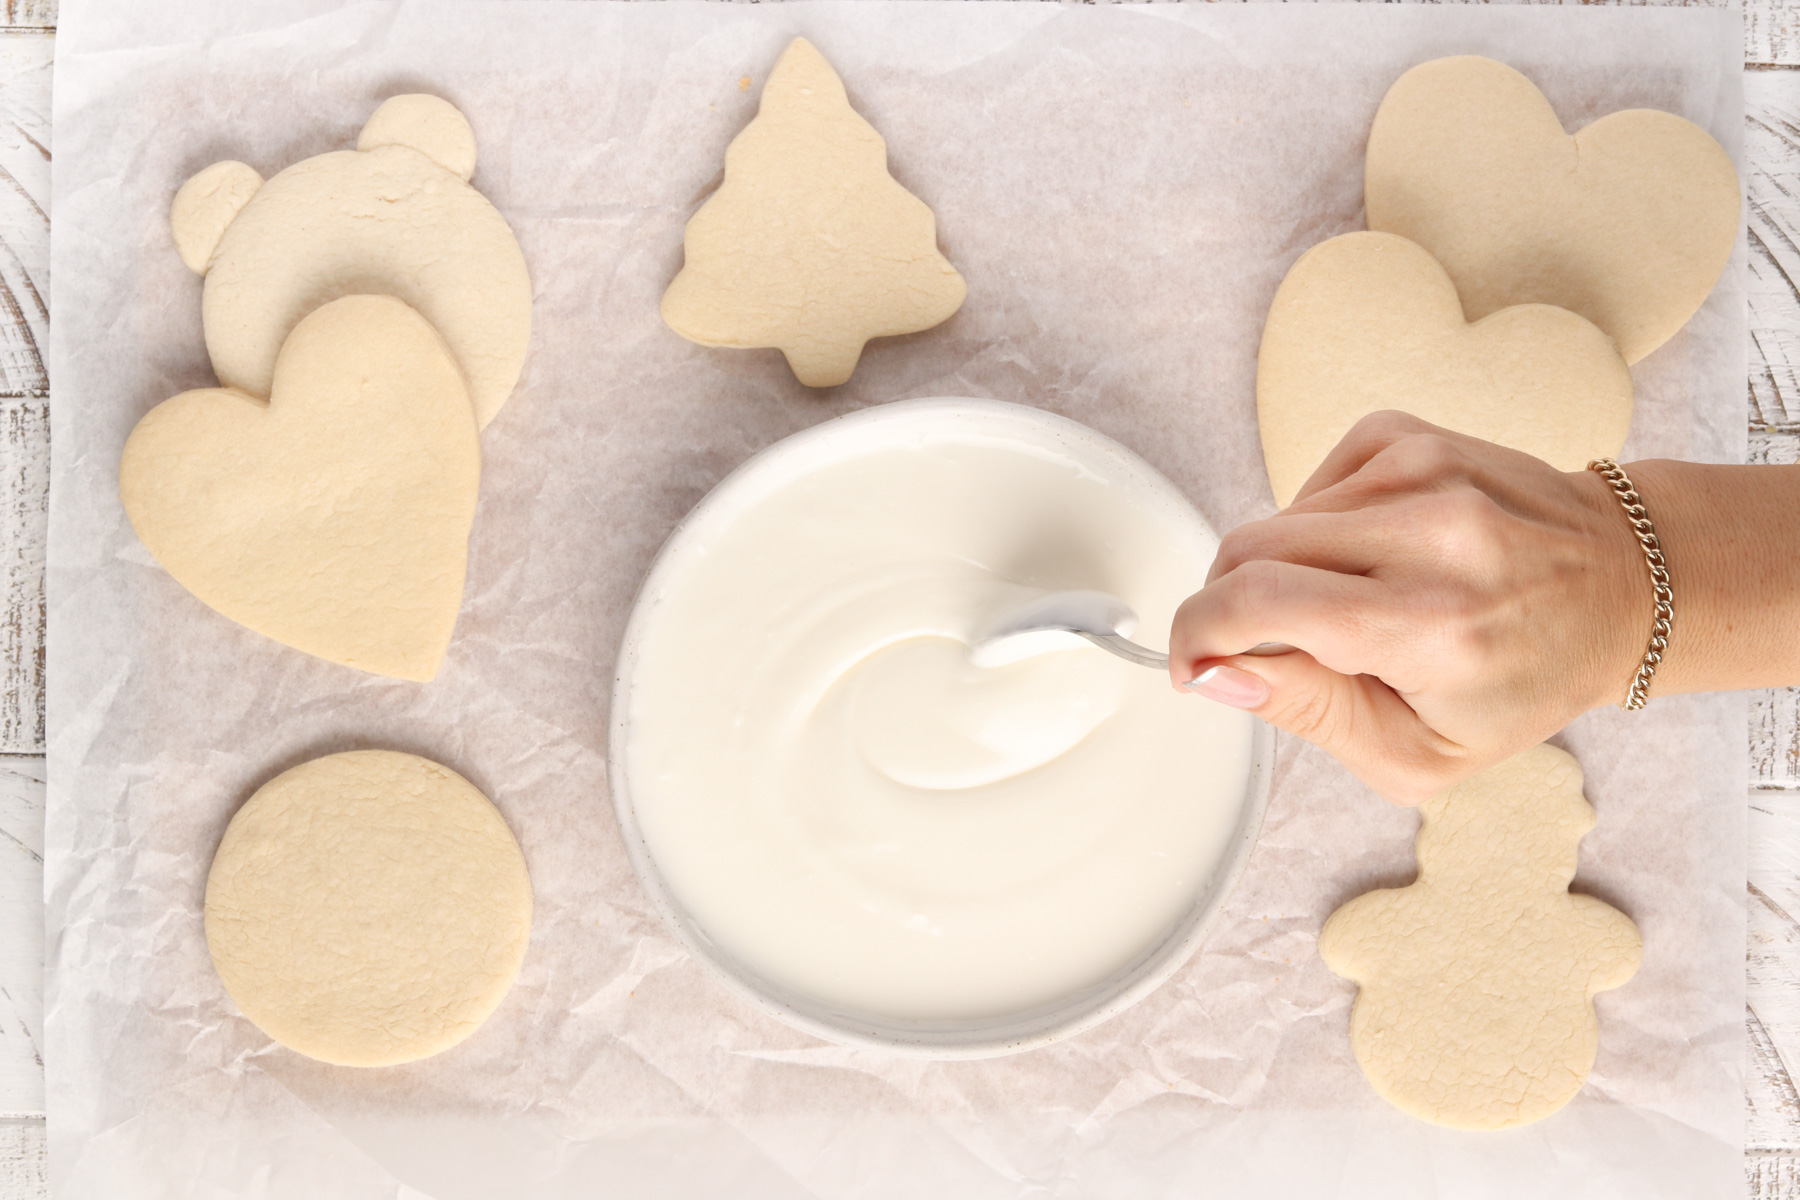 Step 2: Paint Your Own Cookies. Stir the royal icing to get rid of air bubbles.